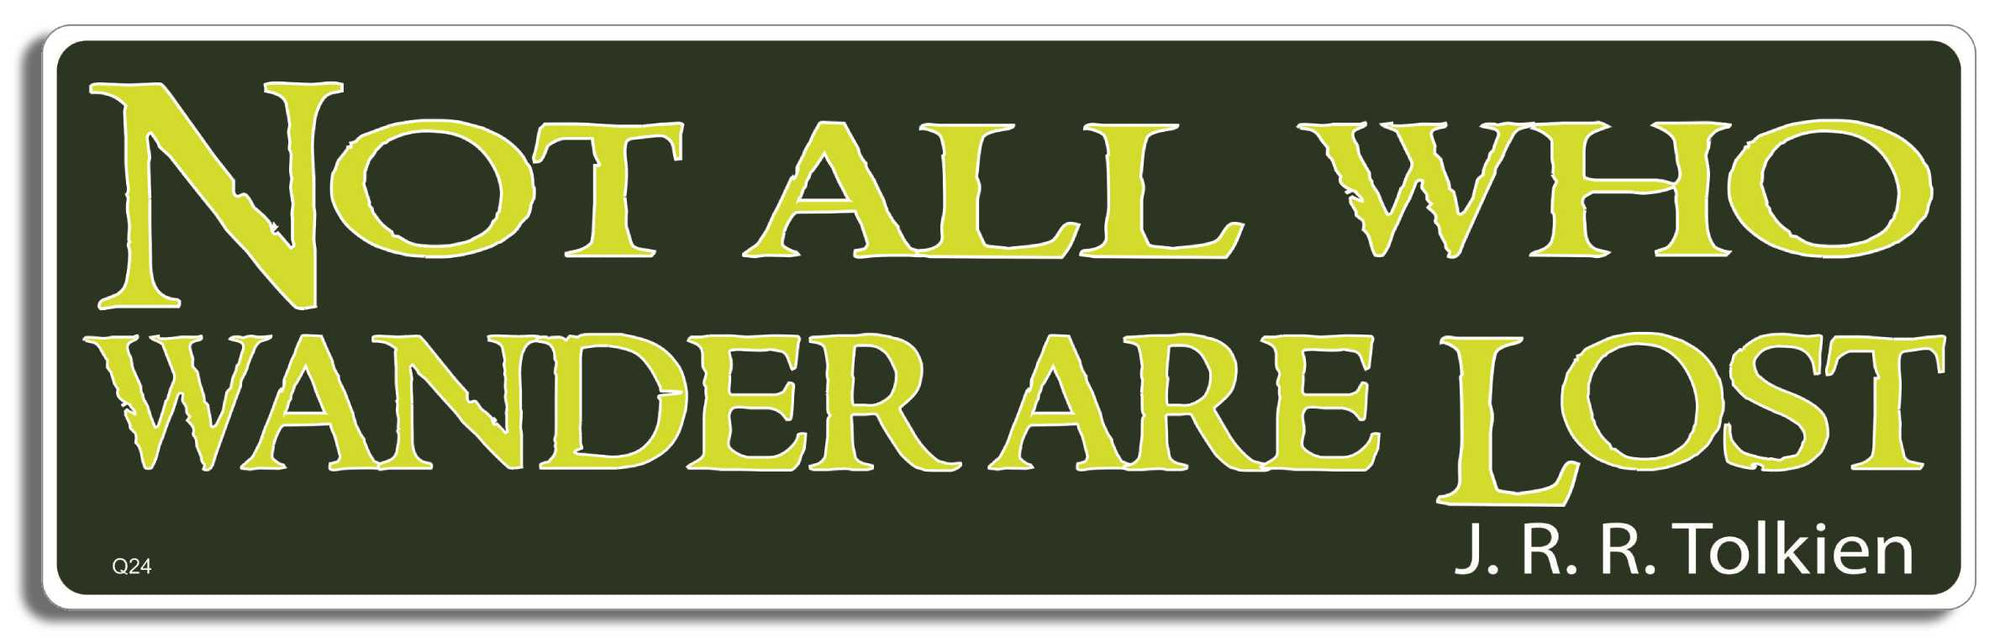 Not all who wander are lost - J.R.R. Tolkien - 3" x 10" Bumper Sticker--Car Magnet- -  Decal Bumper Sticker-quotation Bumper Sticker Car Magnet Not all who wander are lost-J.R.R.-  Decal for carsgrateful dead, hobbit, lord of the rings, lotr, tolkien